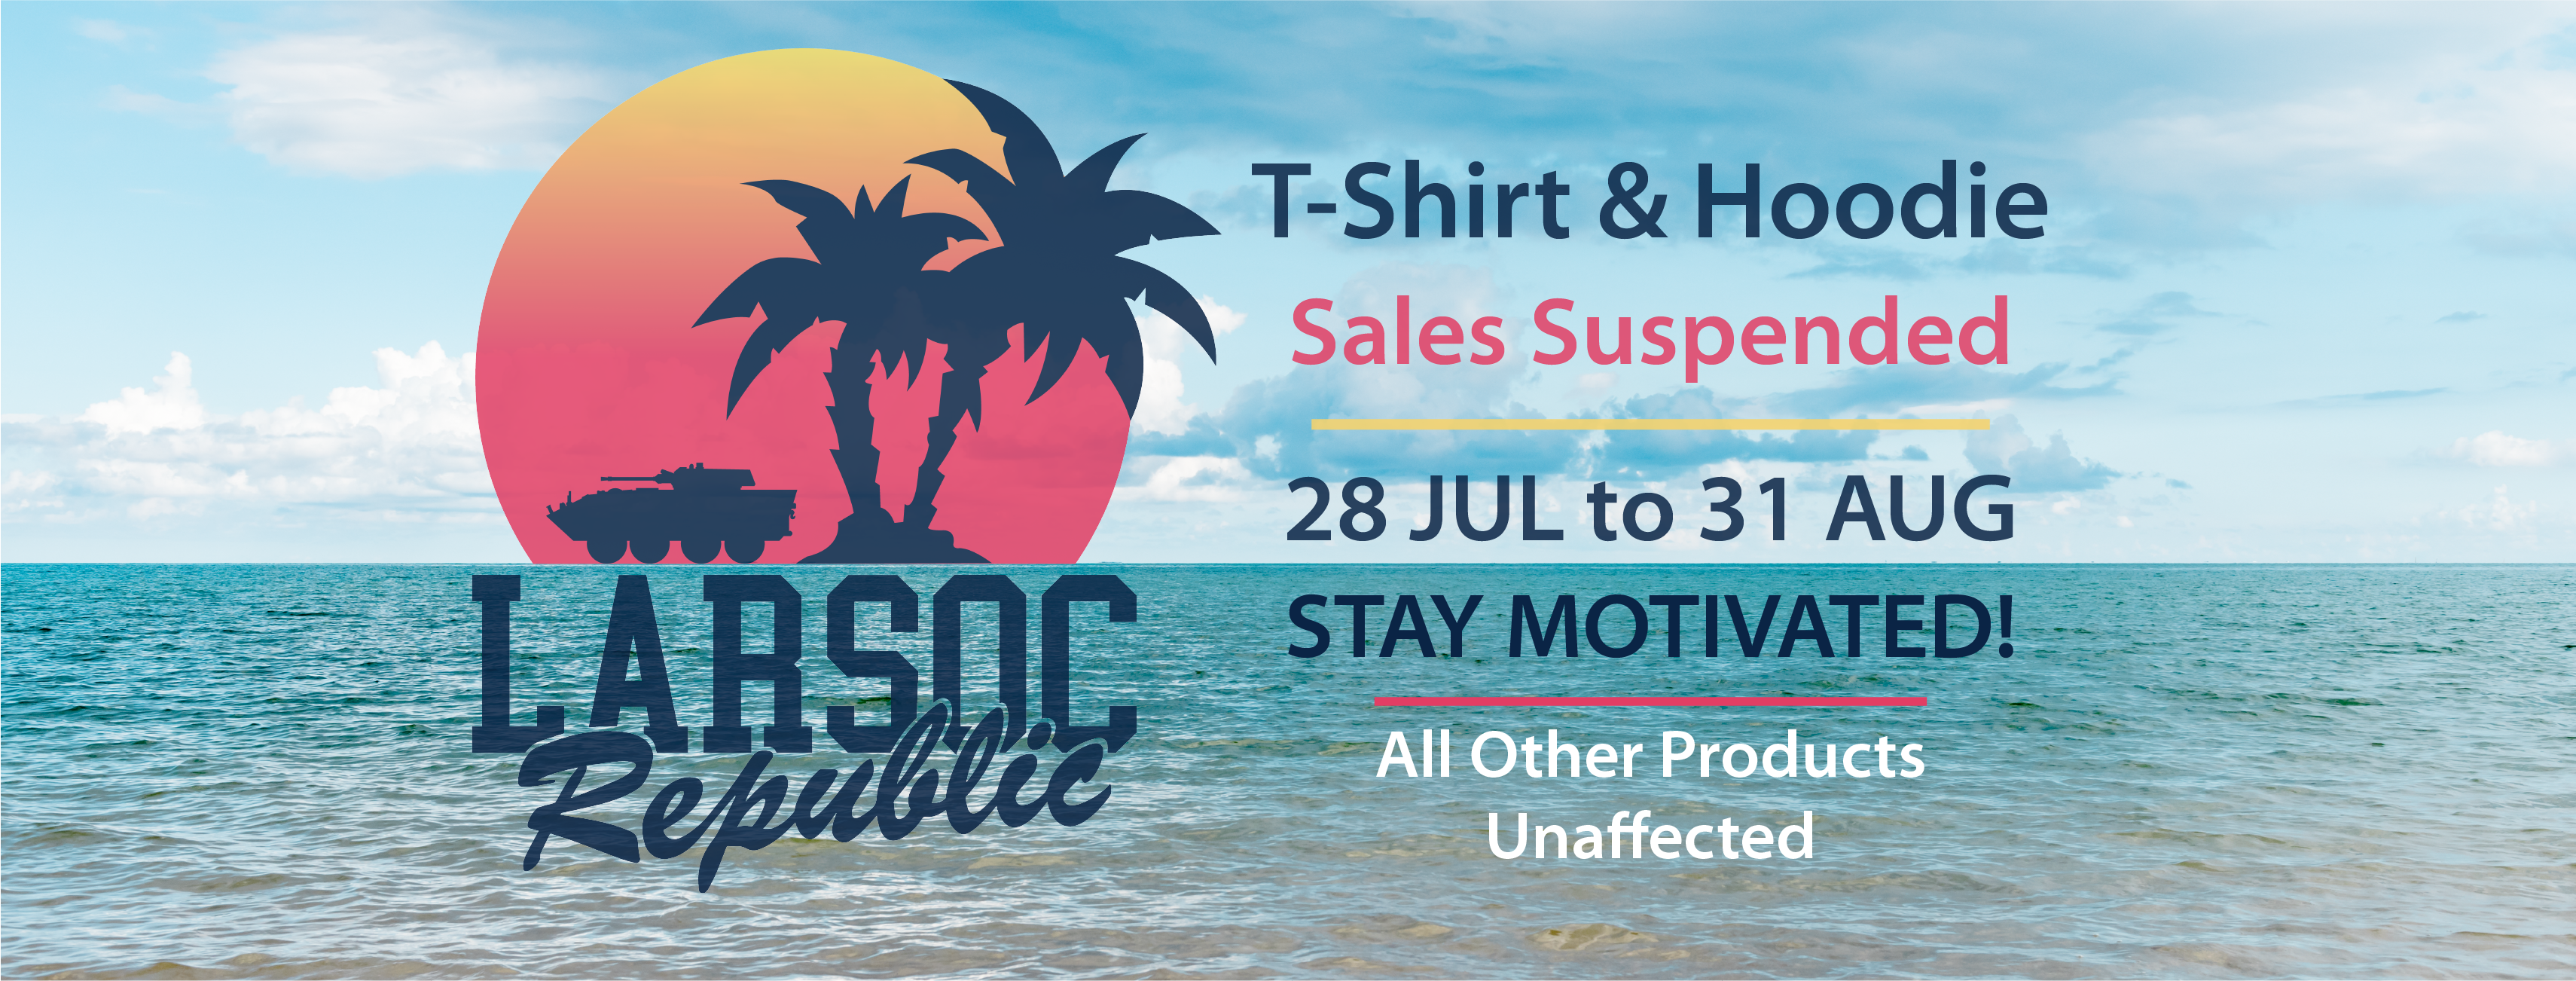 All T-Shirt & Hoodie Sales Suspended